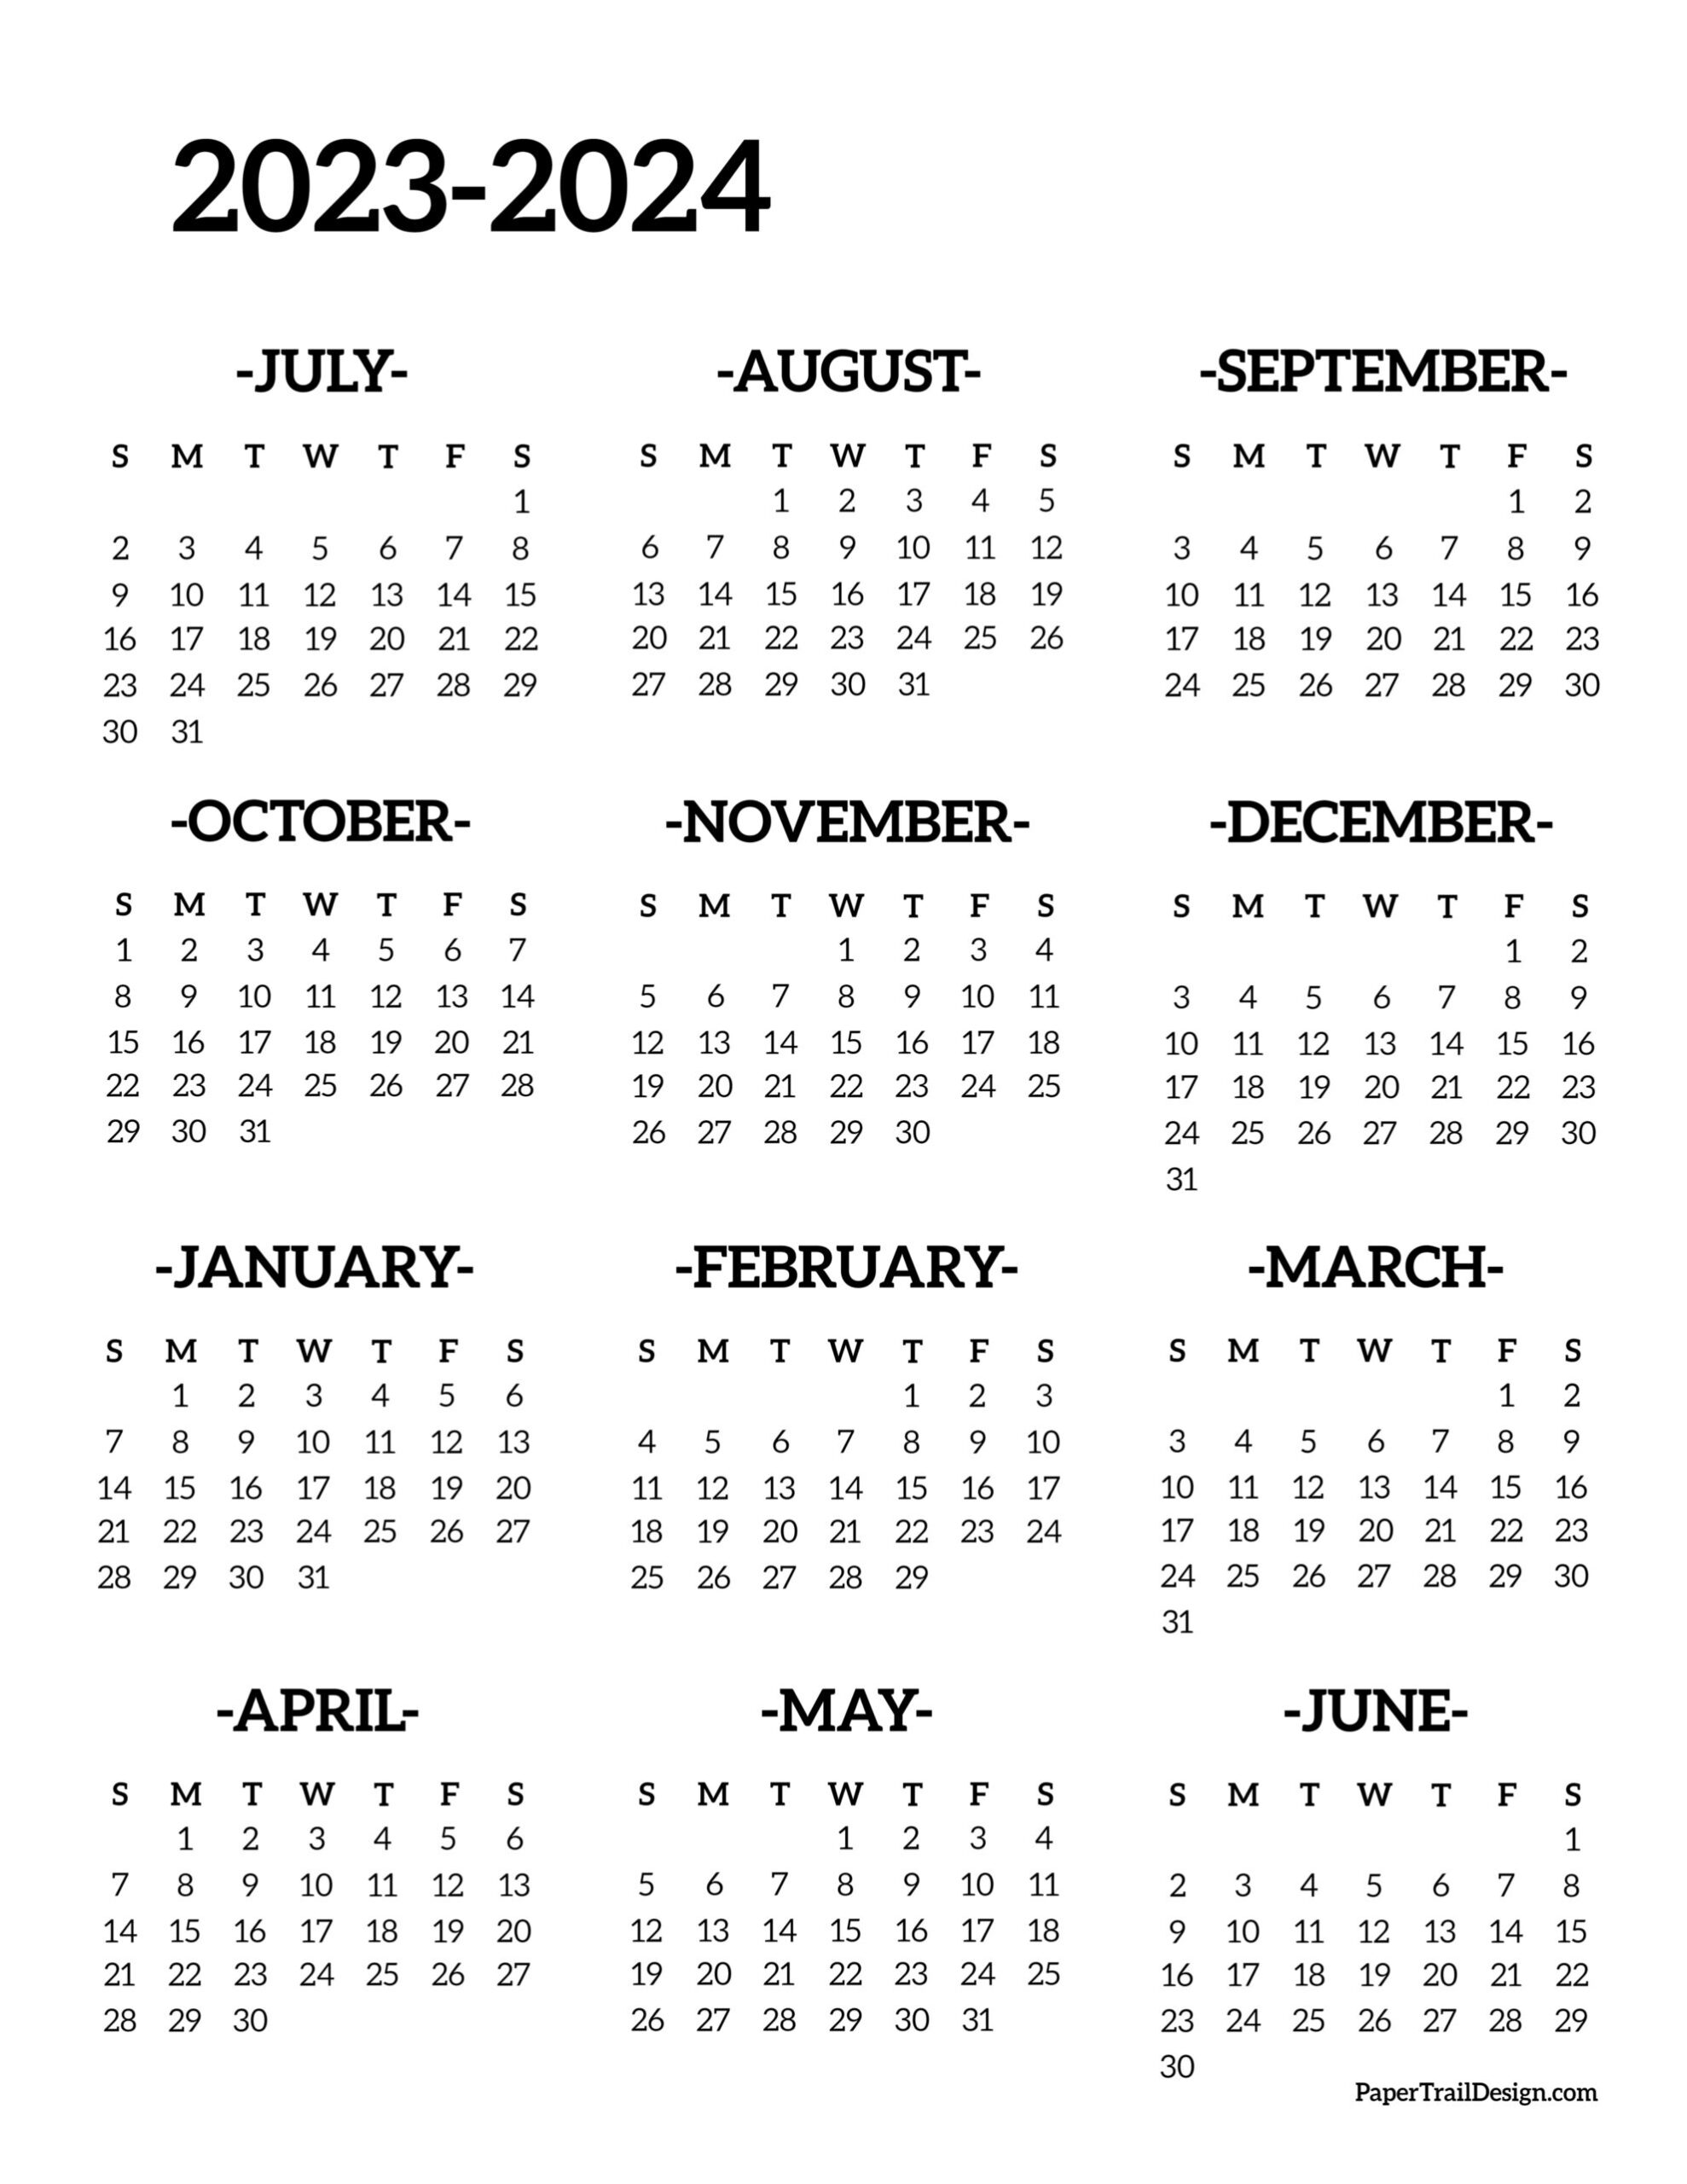 2023-2024 School Year Calendar Free Printable - Paper Trail Design | 2023 And 2024 Yearly Calendar